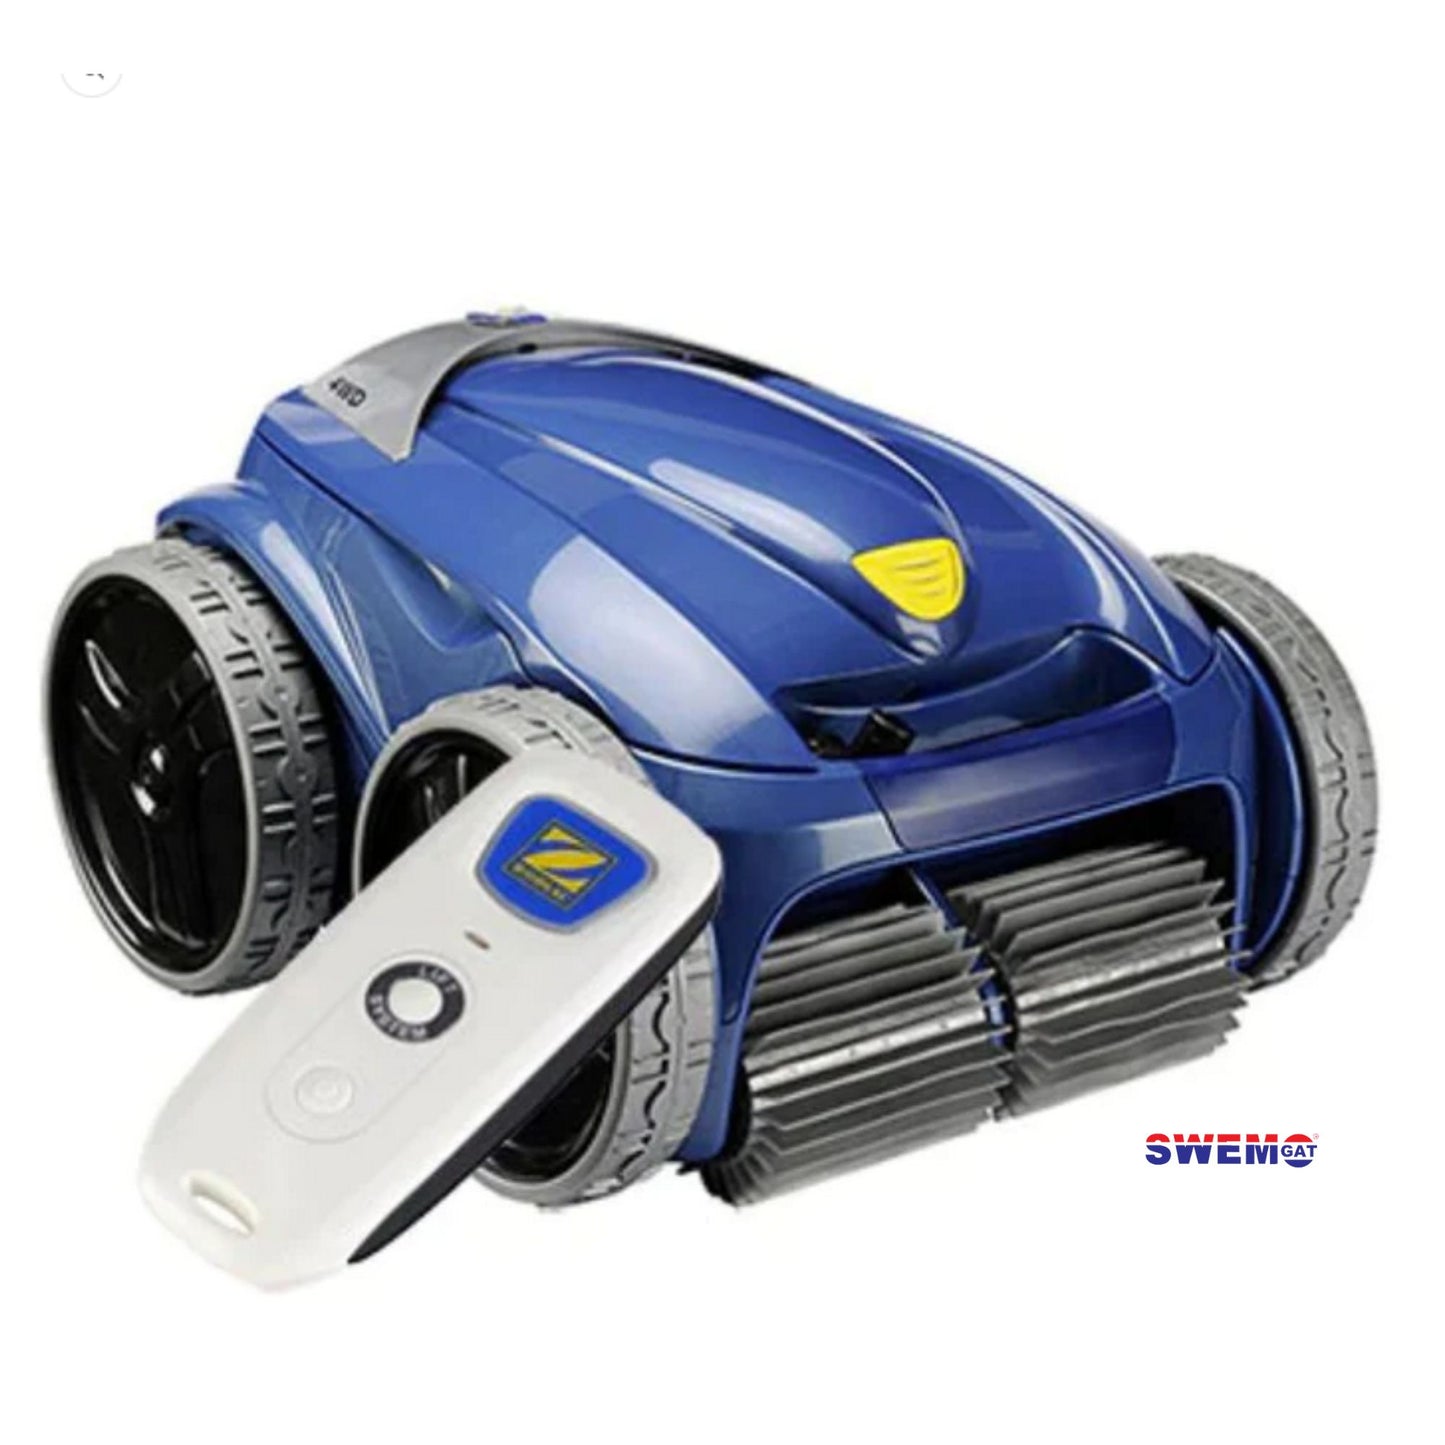 Zodiac VX55 Robotic Swimming Pool cleaner with transport trolley | Swemgat.com